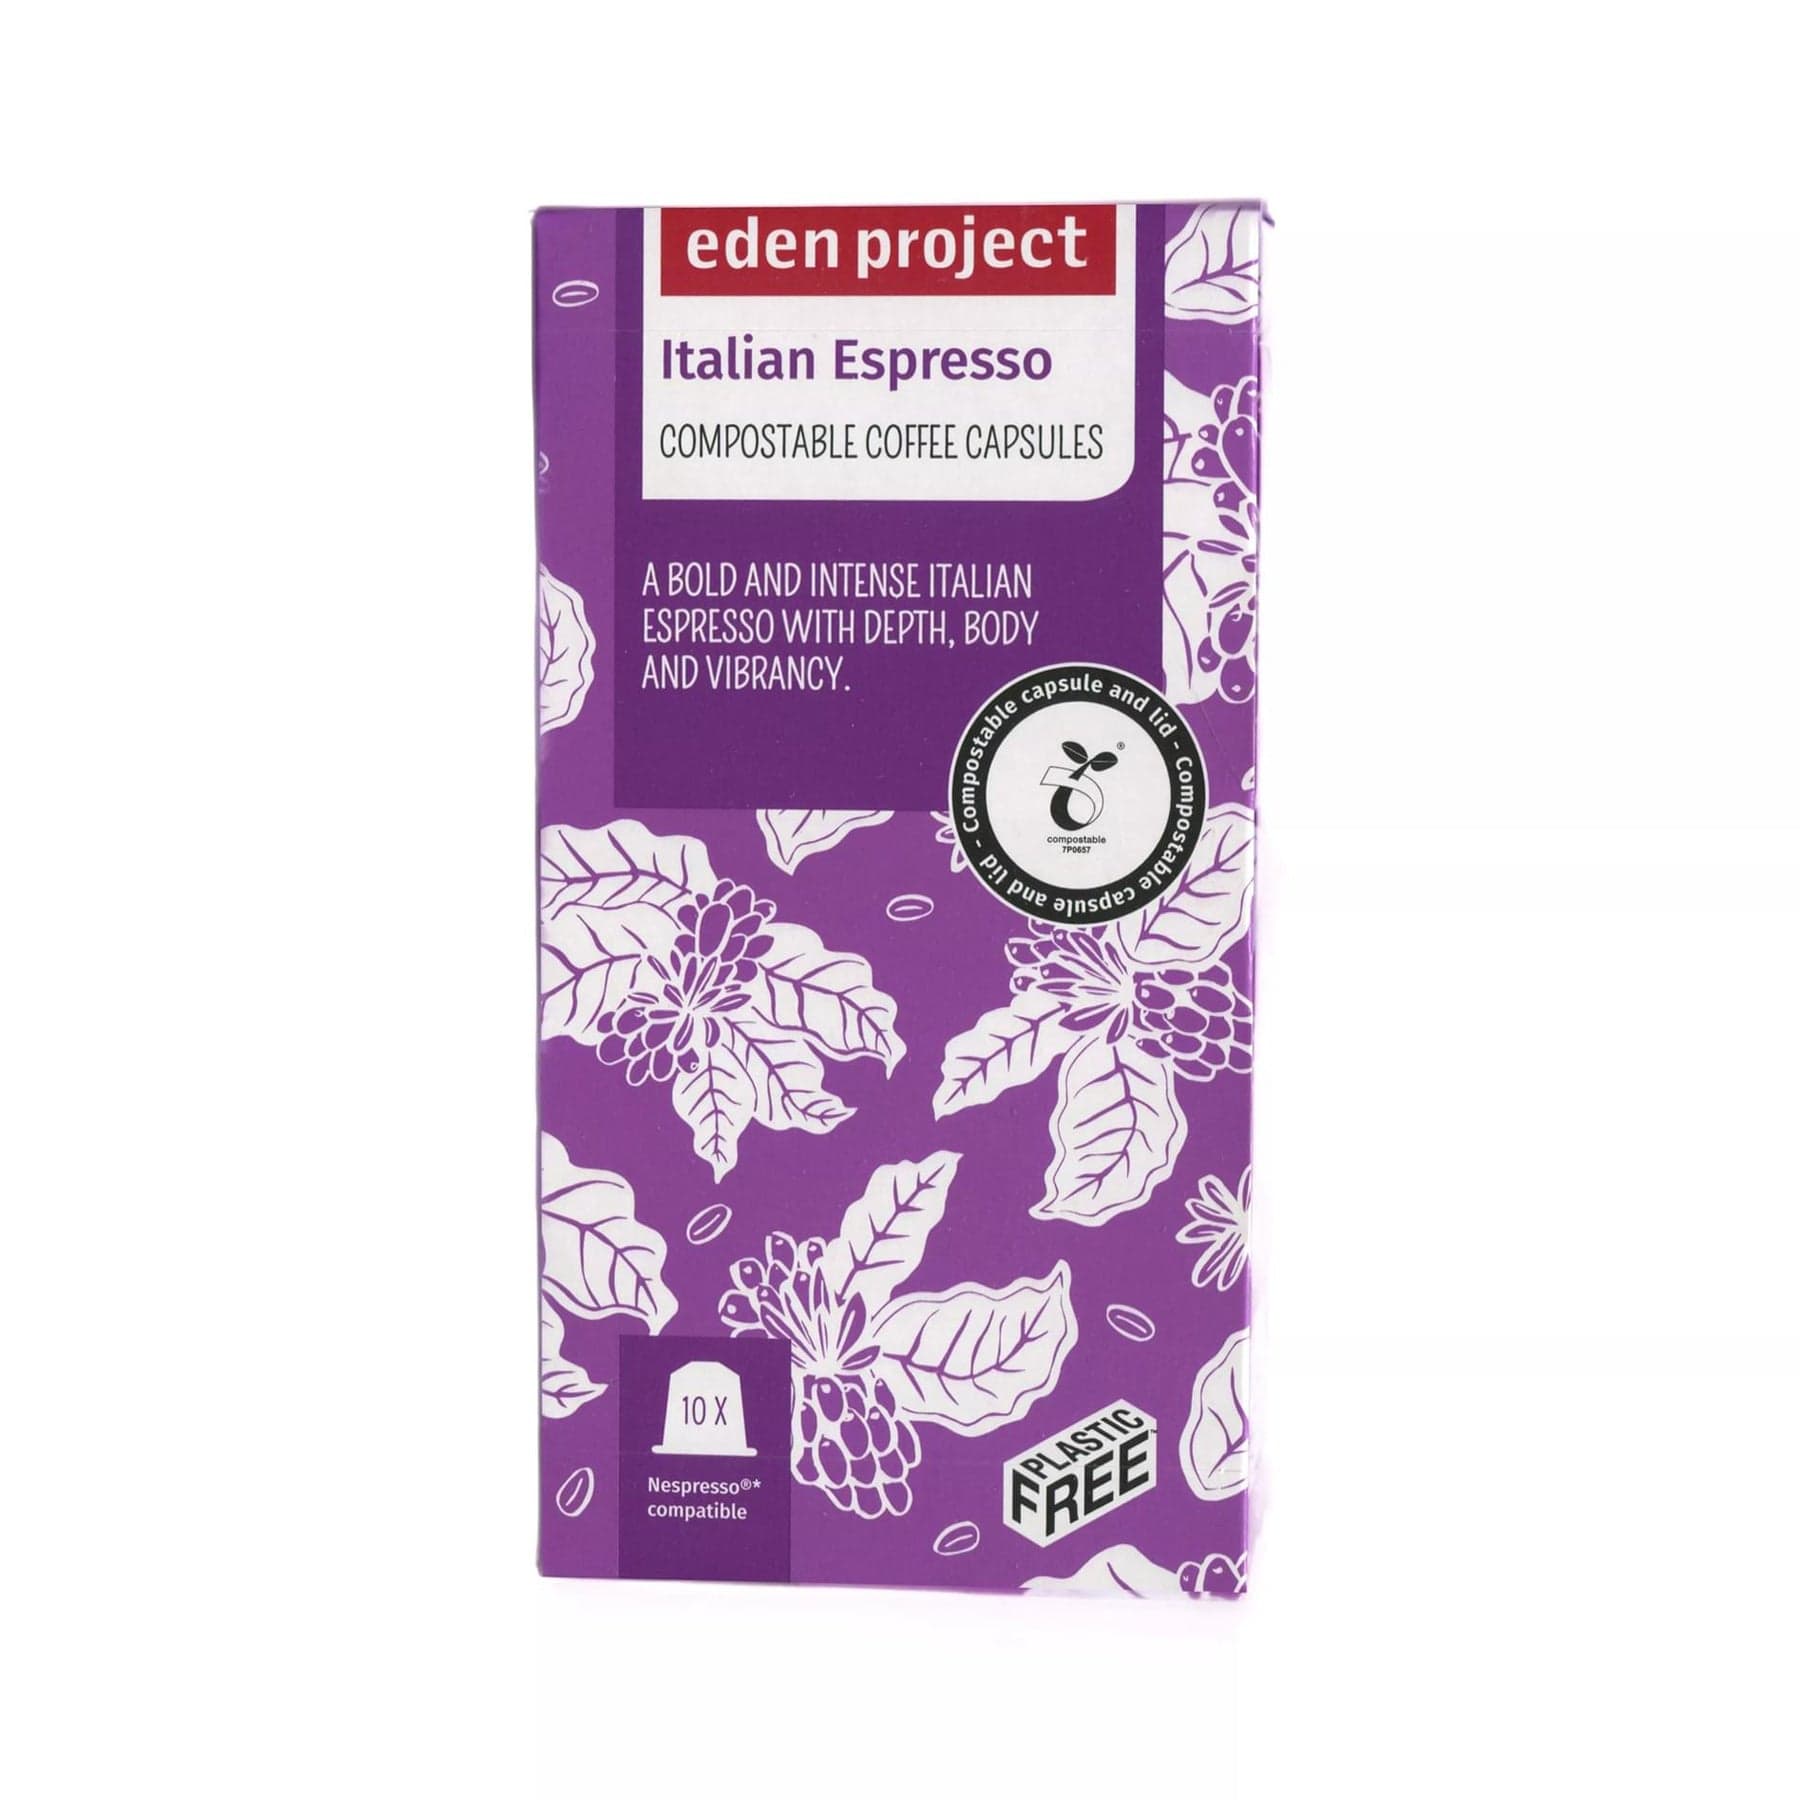 Eden Project Italian Espresso compostable coffee capsules packaging with eco-friendly plastic-free label and Nespresso compatibility note, featuring bold and intense espresso description.